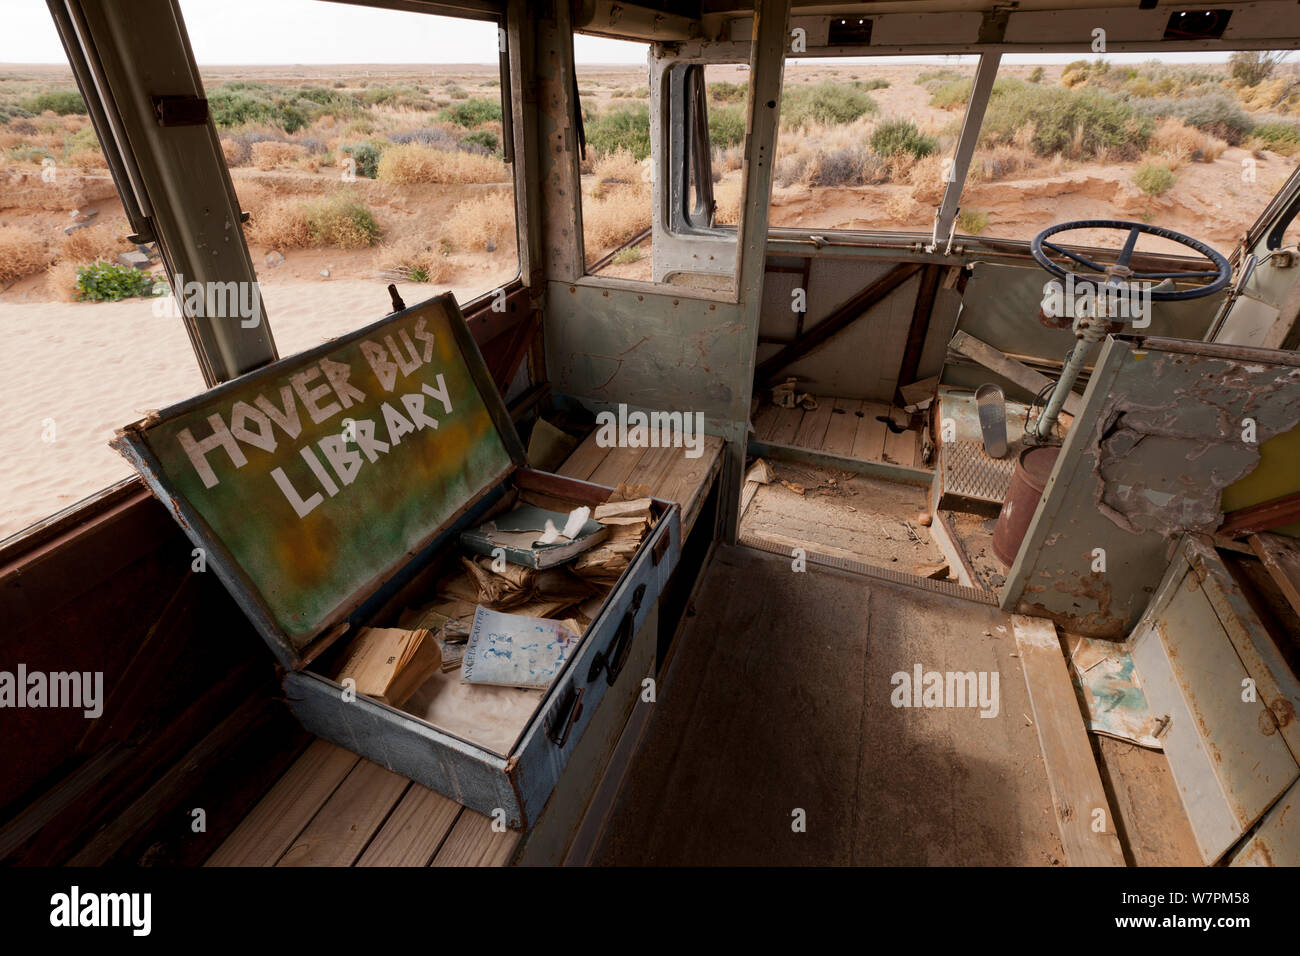 Interior of Ghan Hover Bus, sculpture at Mutonia Sculpture Park, Oodnadata Track, South Australia Stock Photo